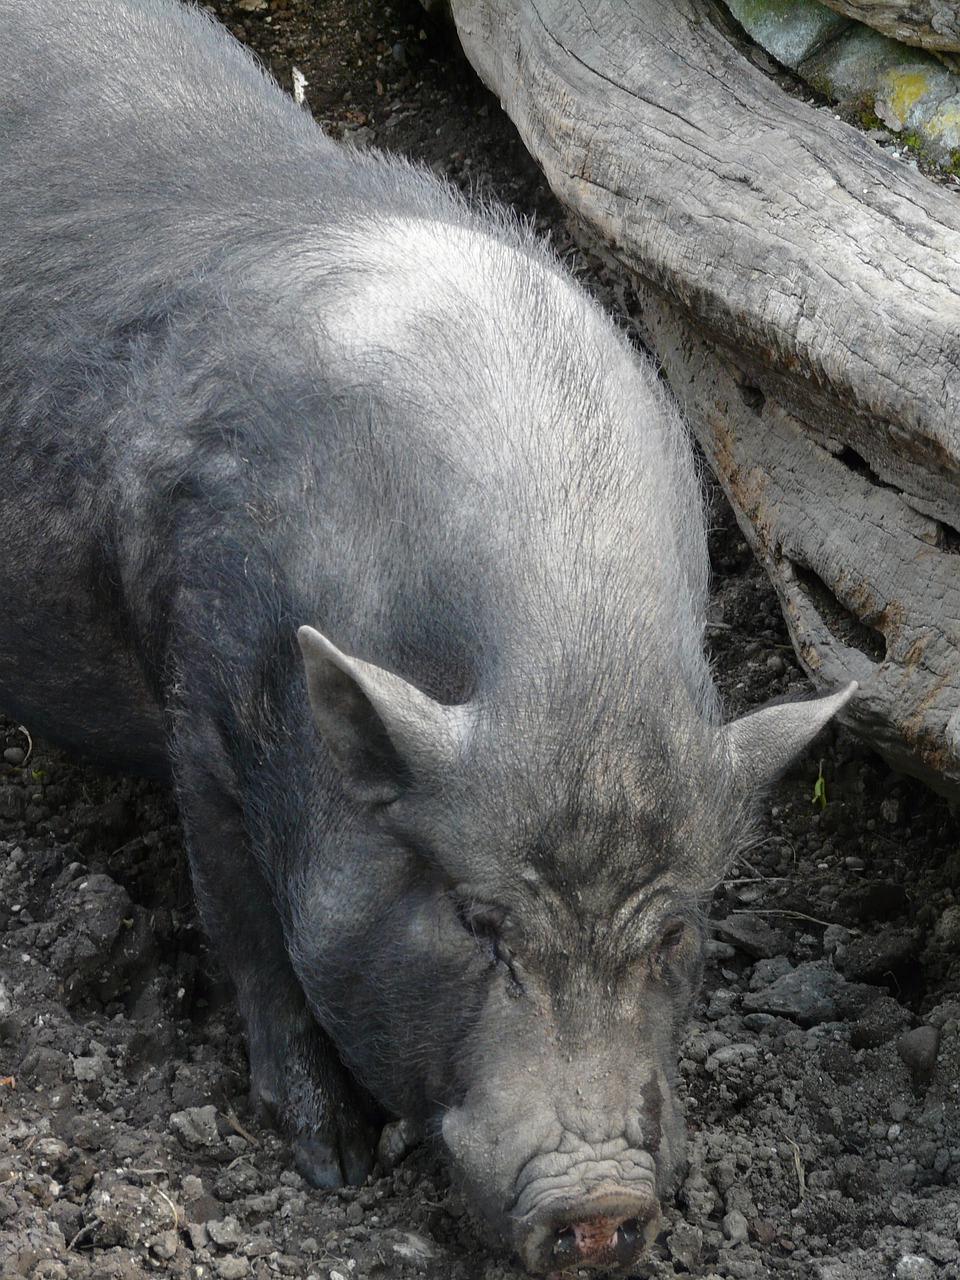 Understanding the Social and Behavioral Needs of Potbellied Pigs